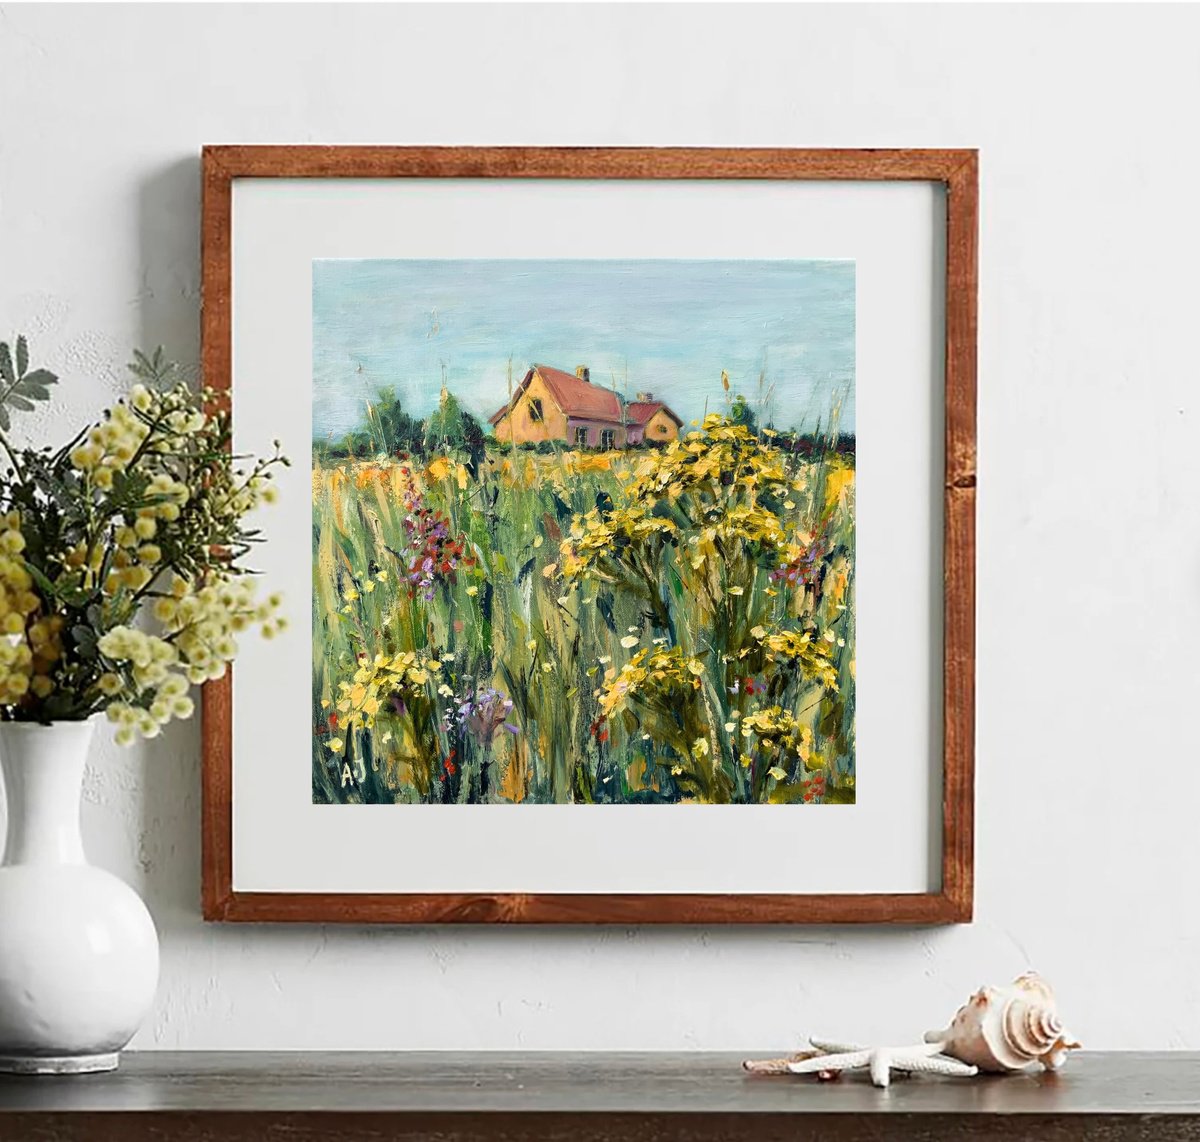 Tansy in the Meadow - wildflowers, cottage, countryside by Alexandra Jagoda (Ovcharenko)